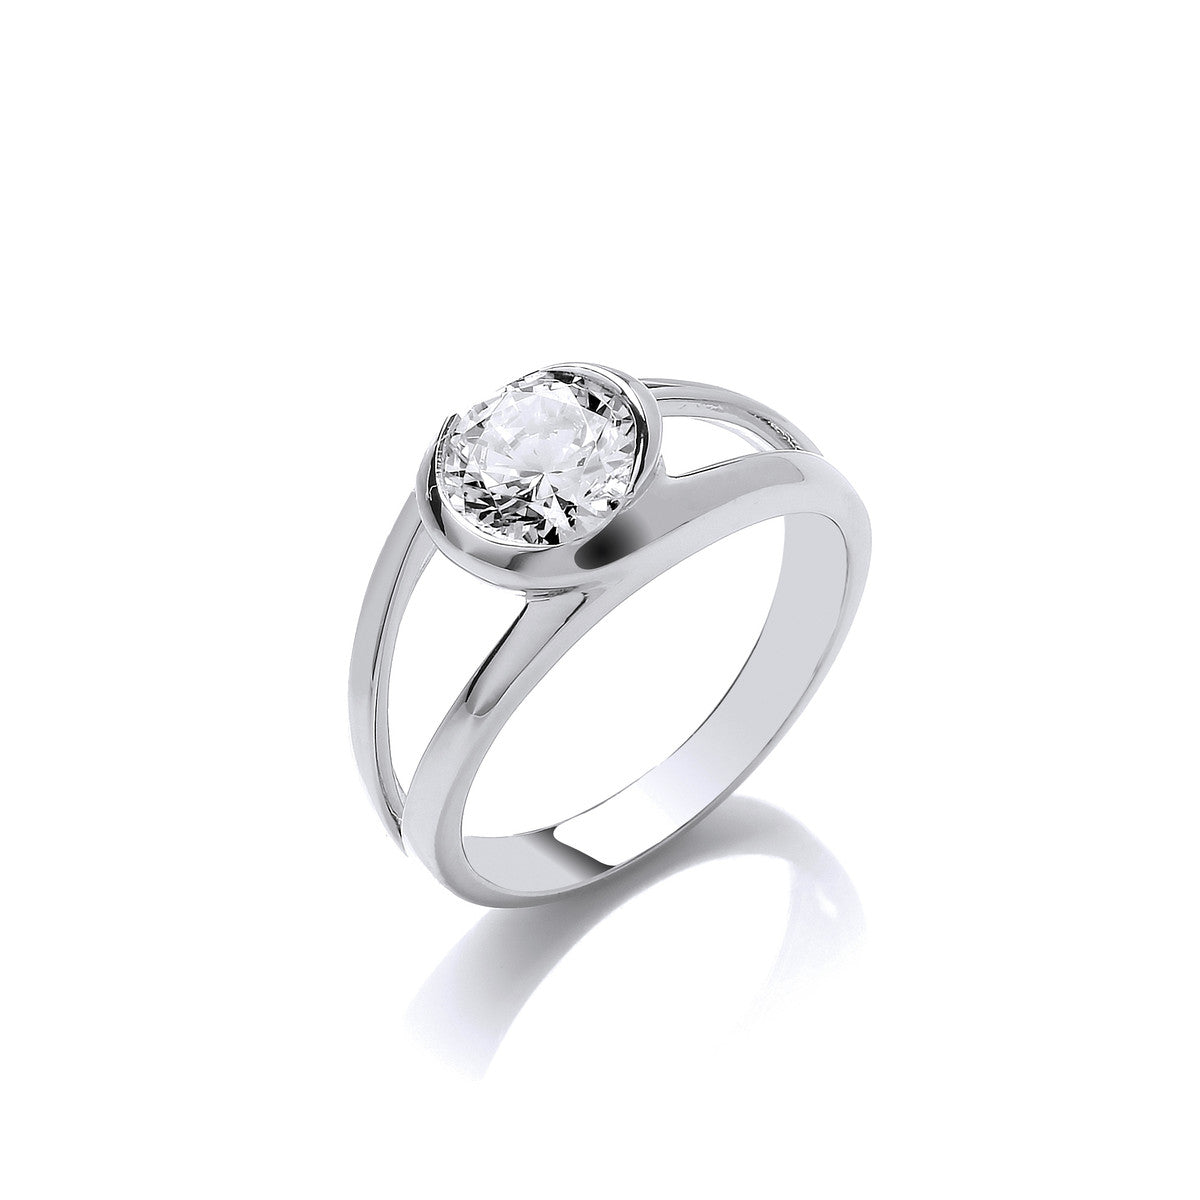 Silver Swirl and CZ Solitaire Ring